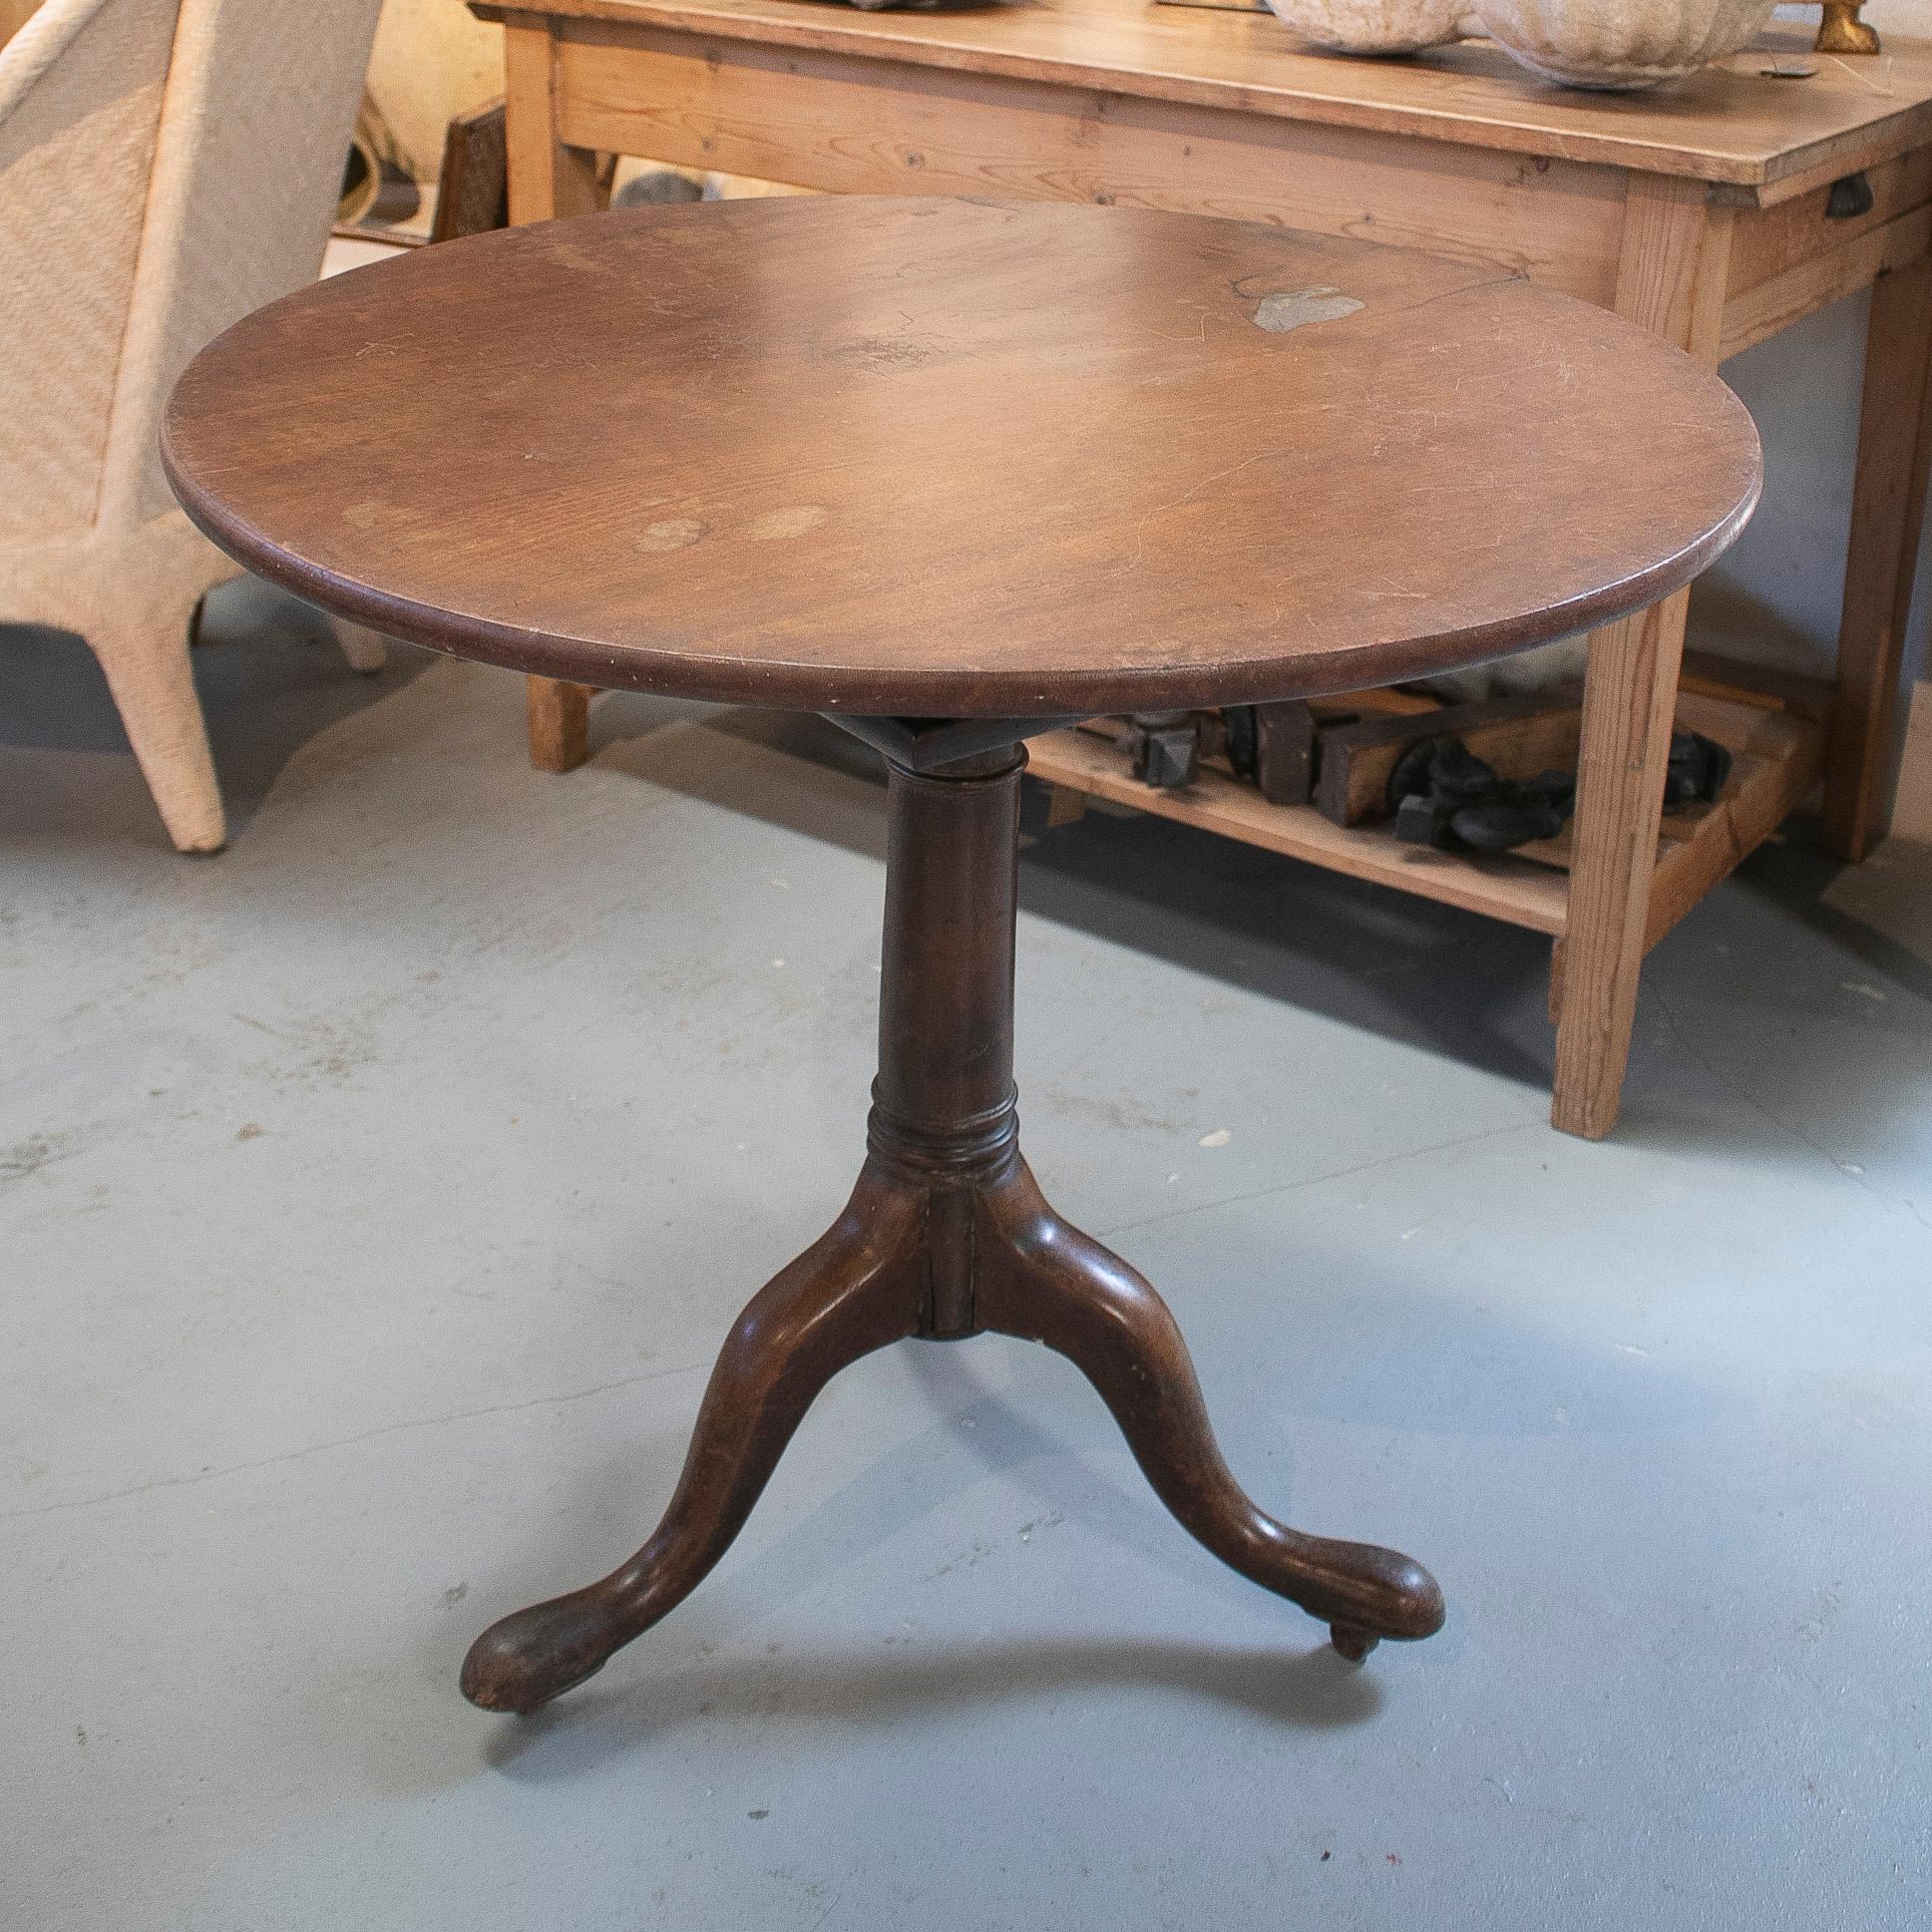 Antique 19th century English round pedestal table with bronze wheels on each foot. Measures: 3-feet.
 